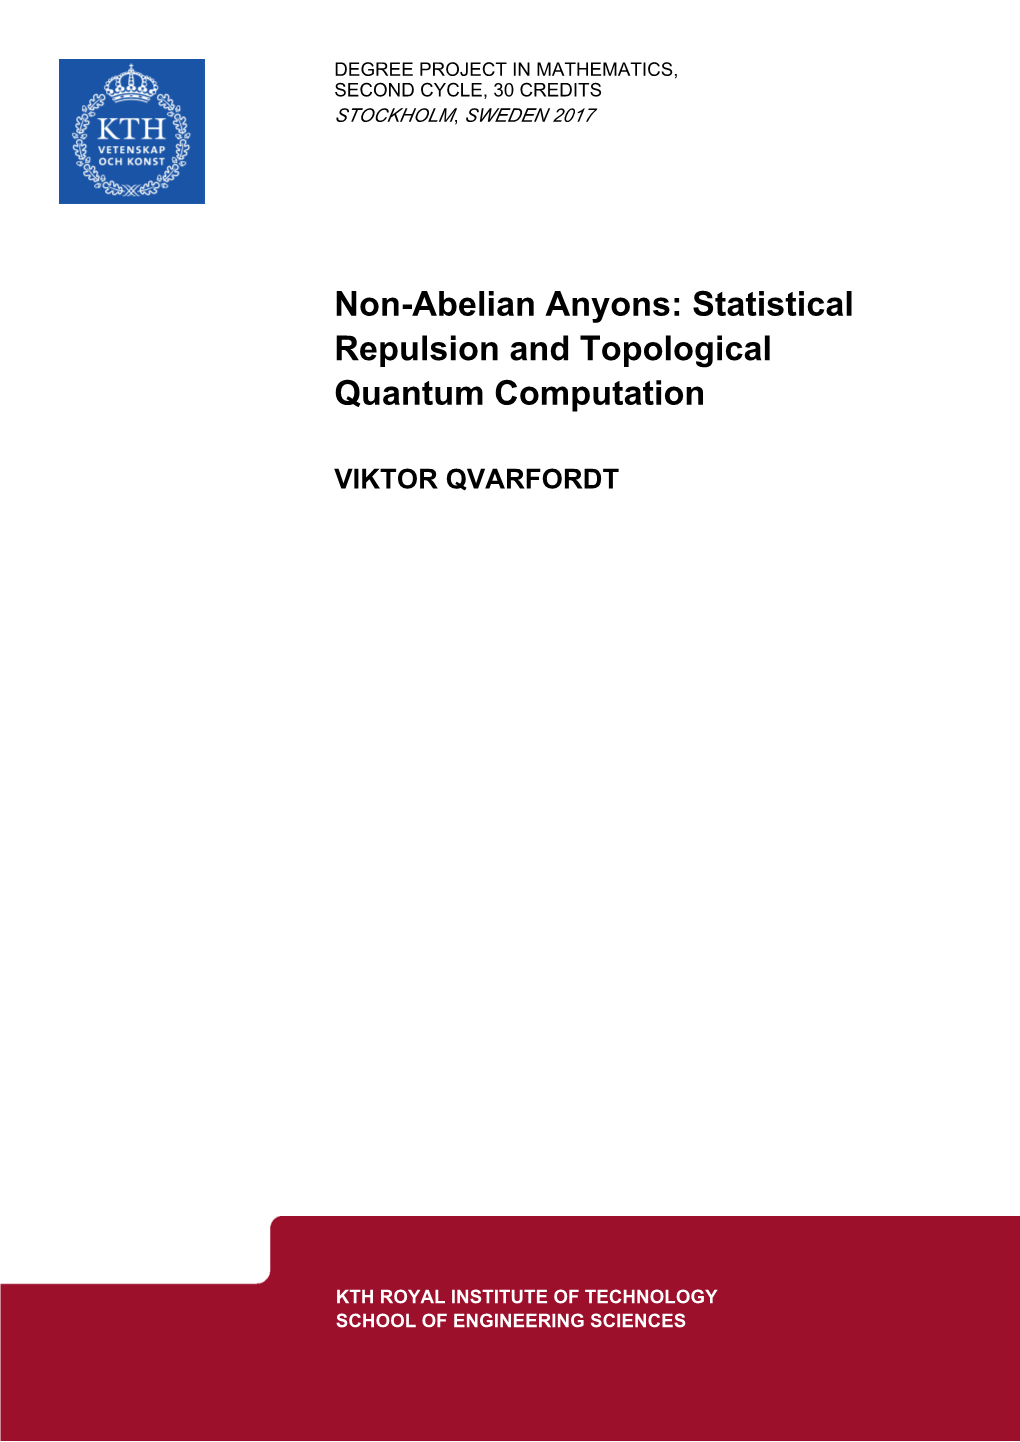 Non-Abelian Anyons: Statistical Repulsion and Topological Quantum Computation